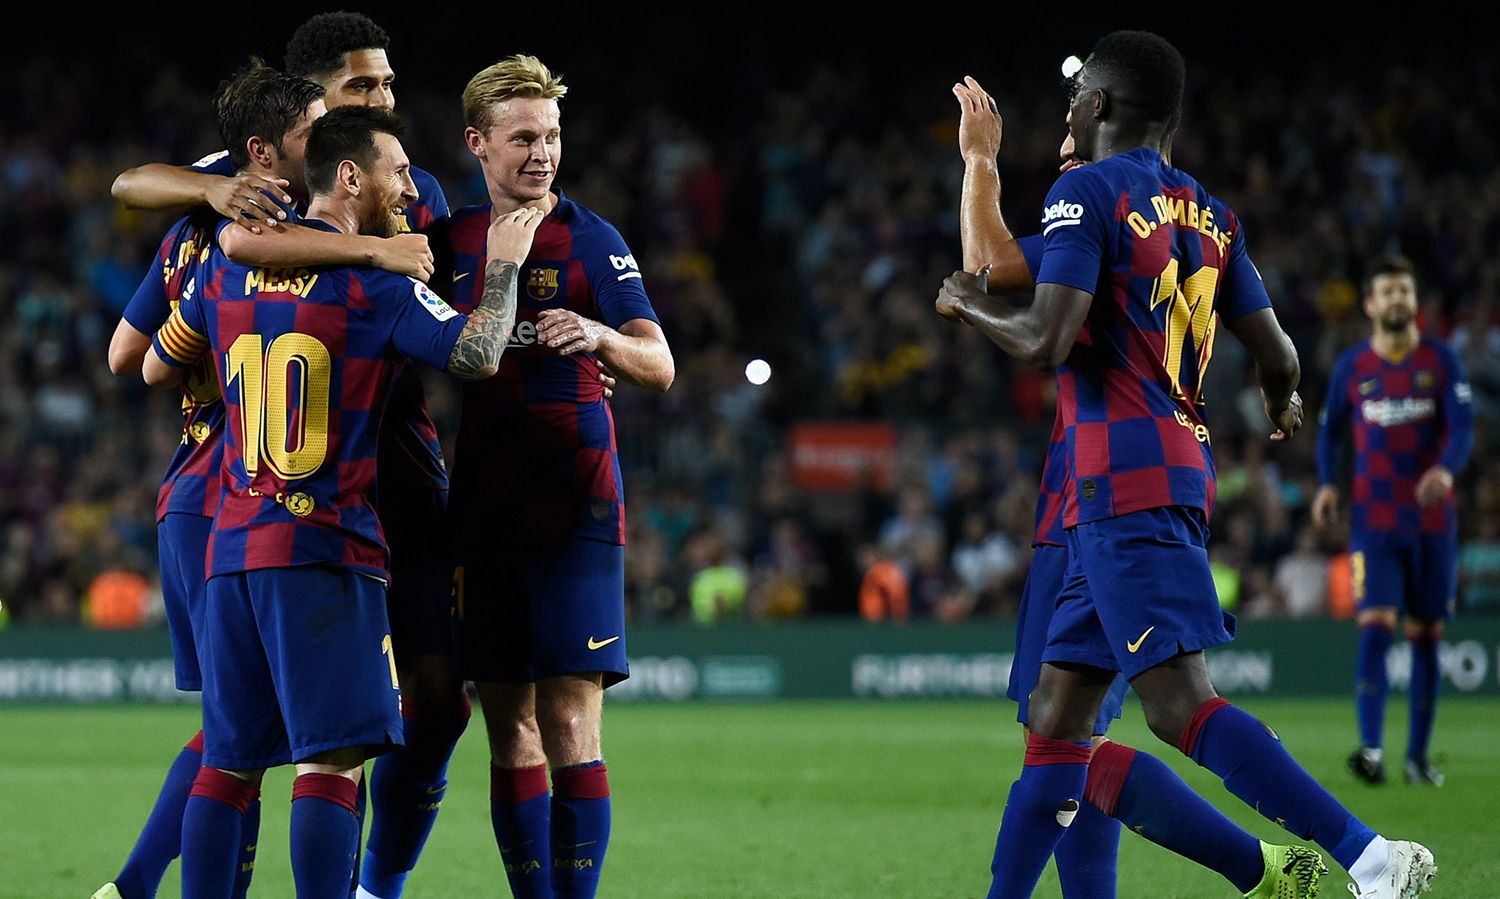 The players of the Barça celebrate a goal against the Seville